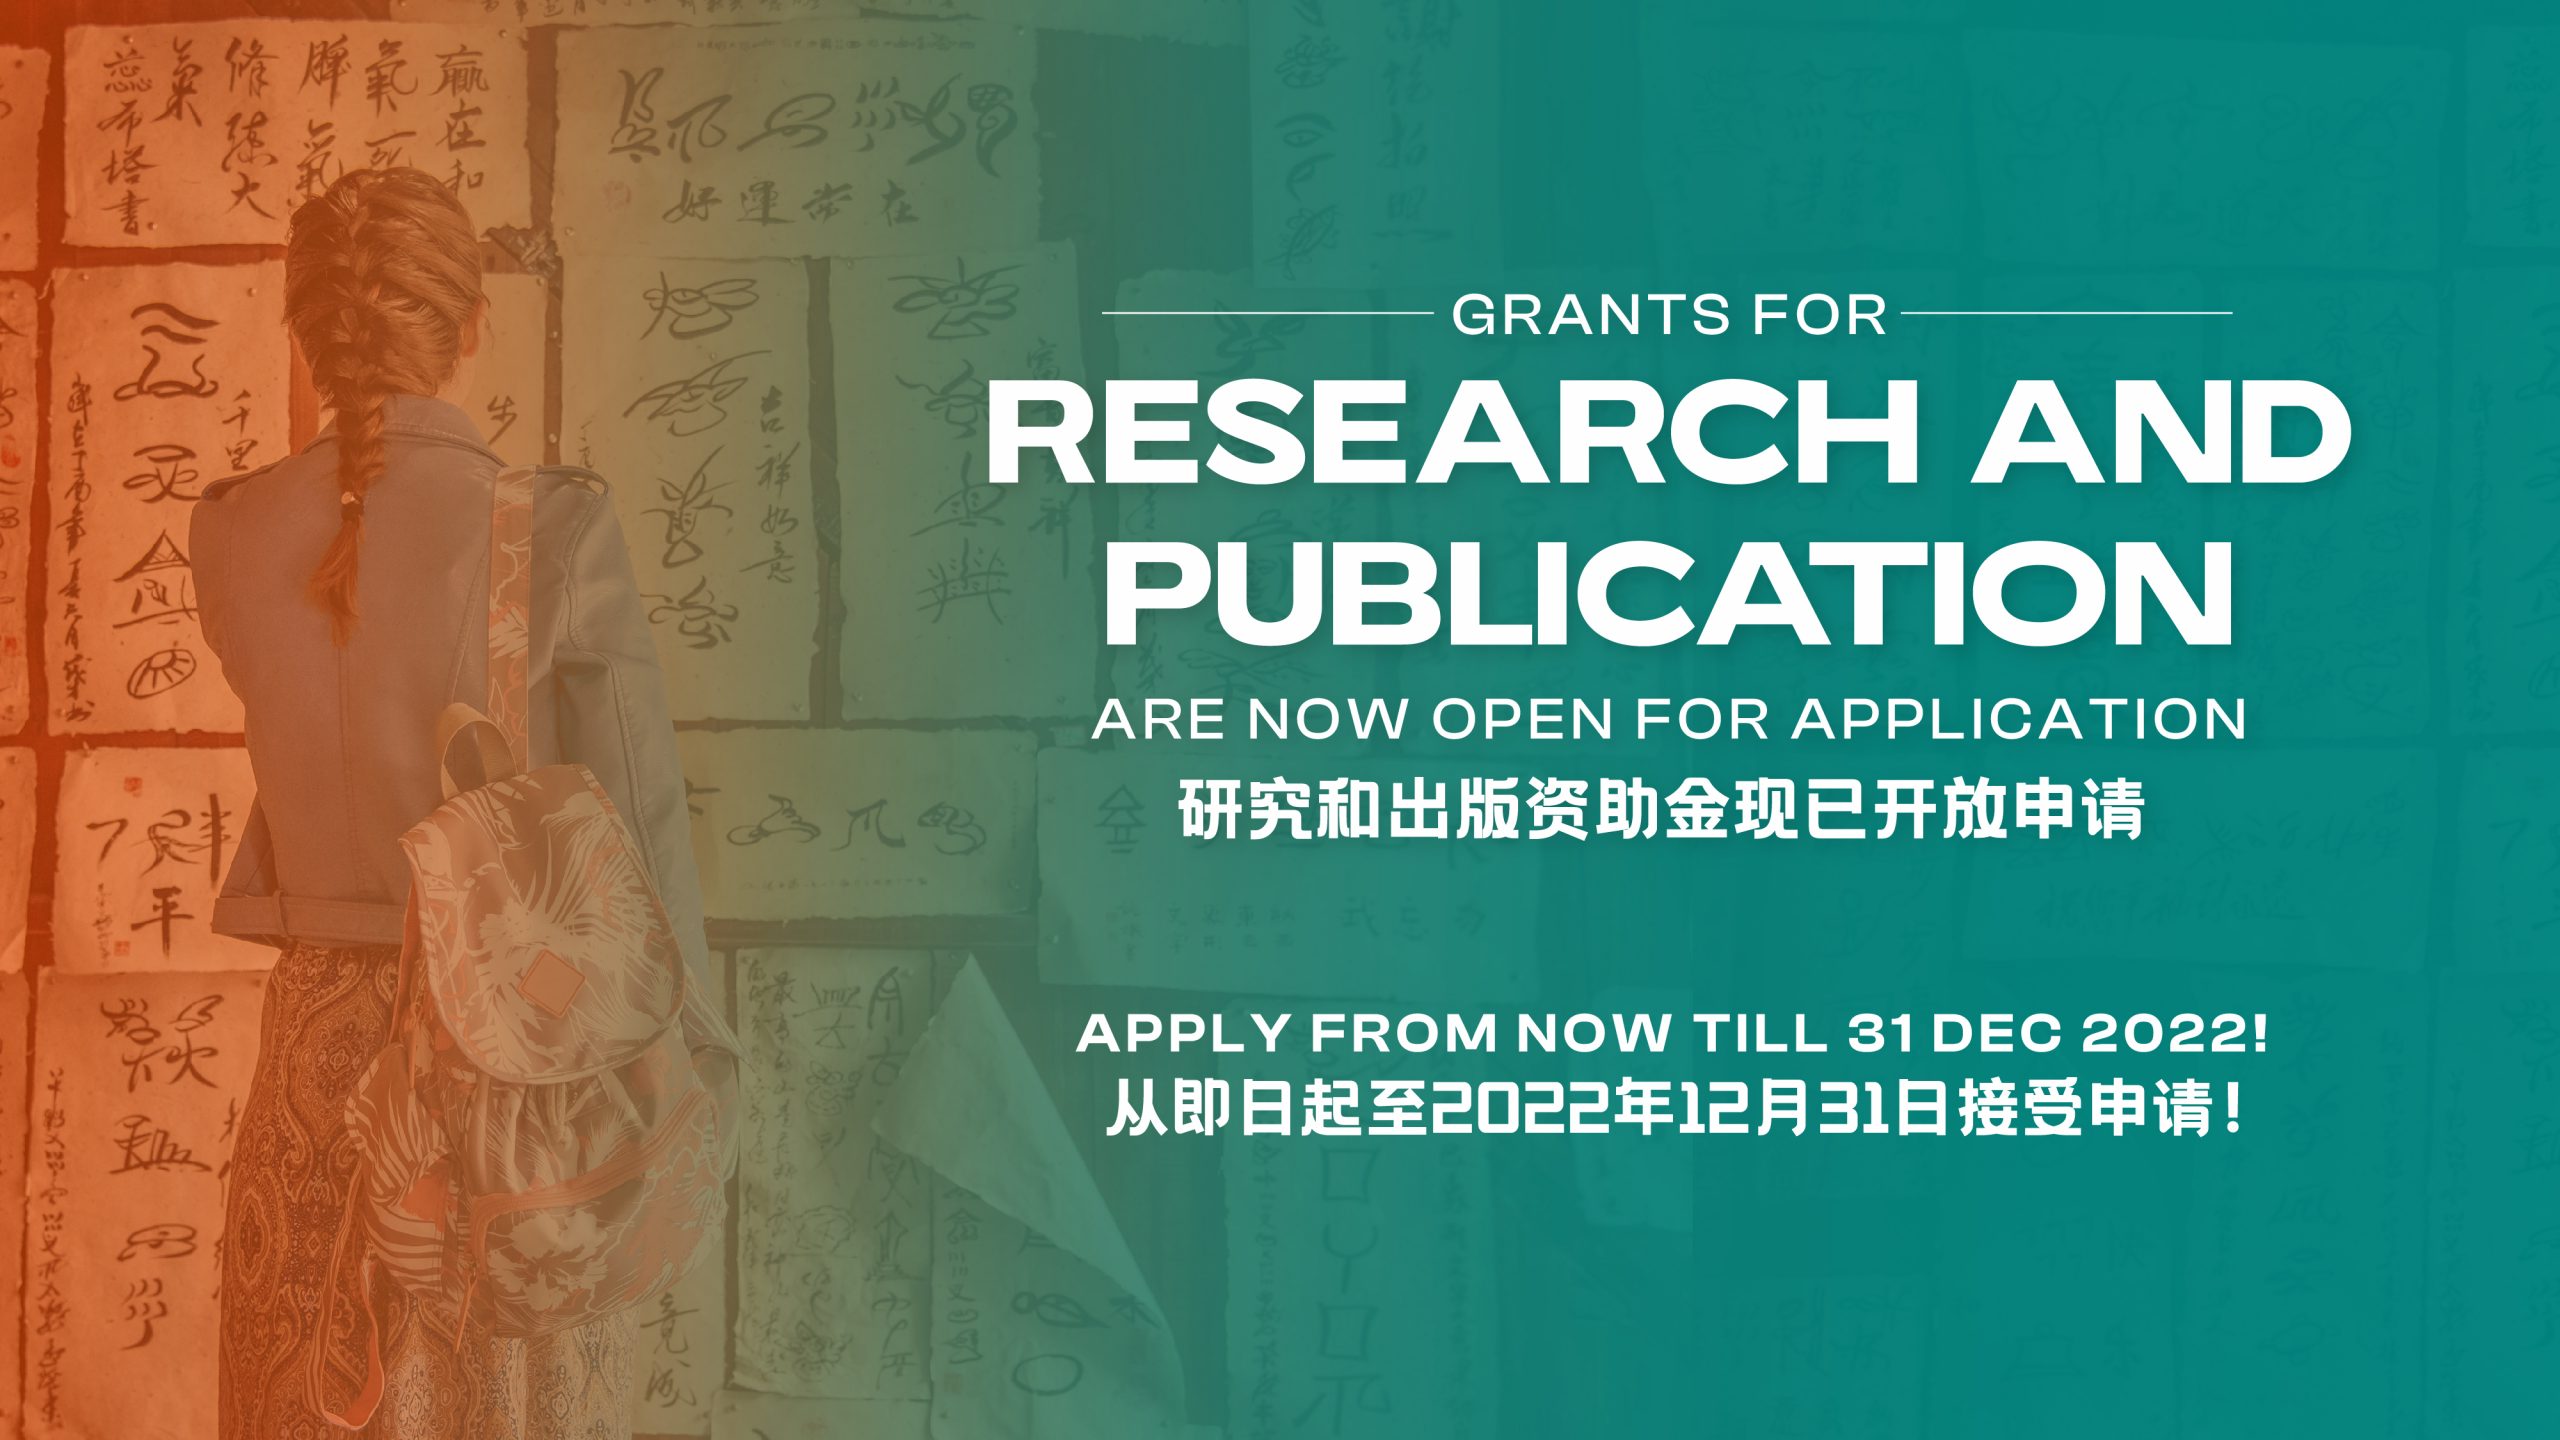 sccc_oct2022_research-and-publication-grants-launch-03-2